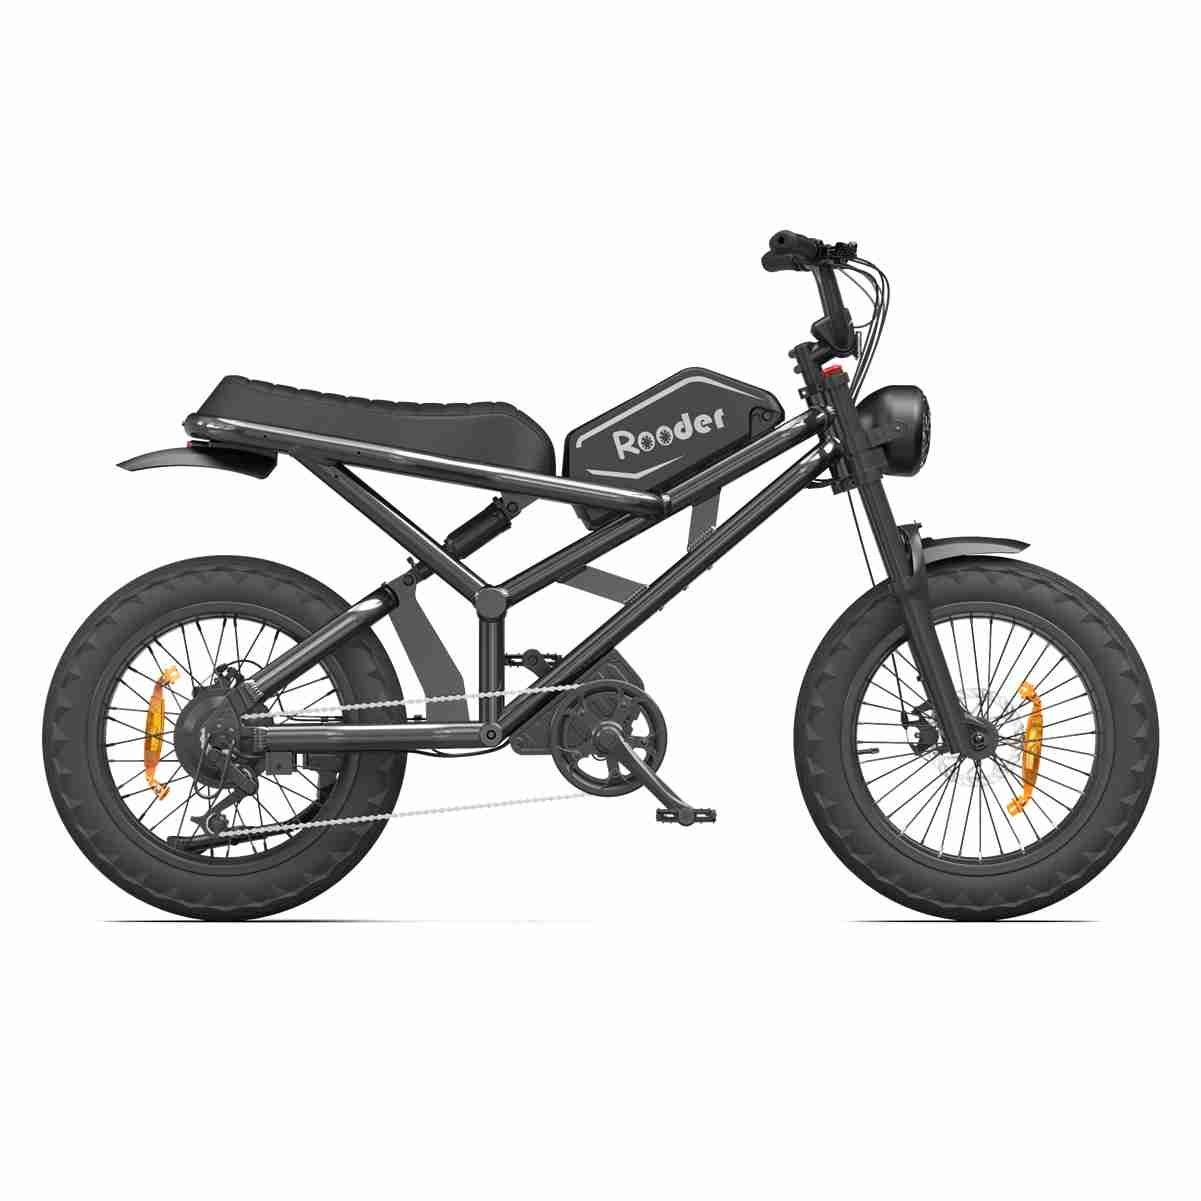 Electric Dirt Bike With Gears